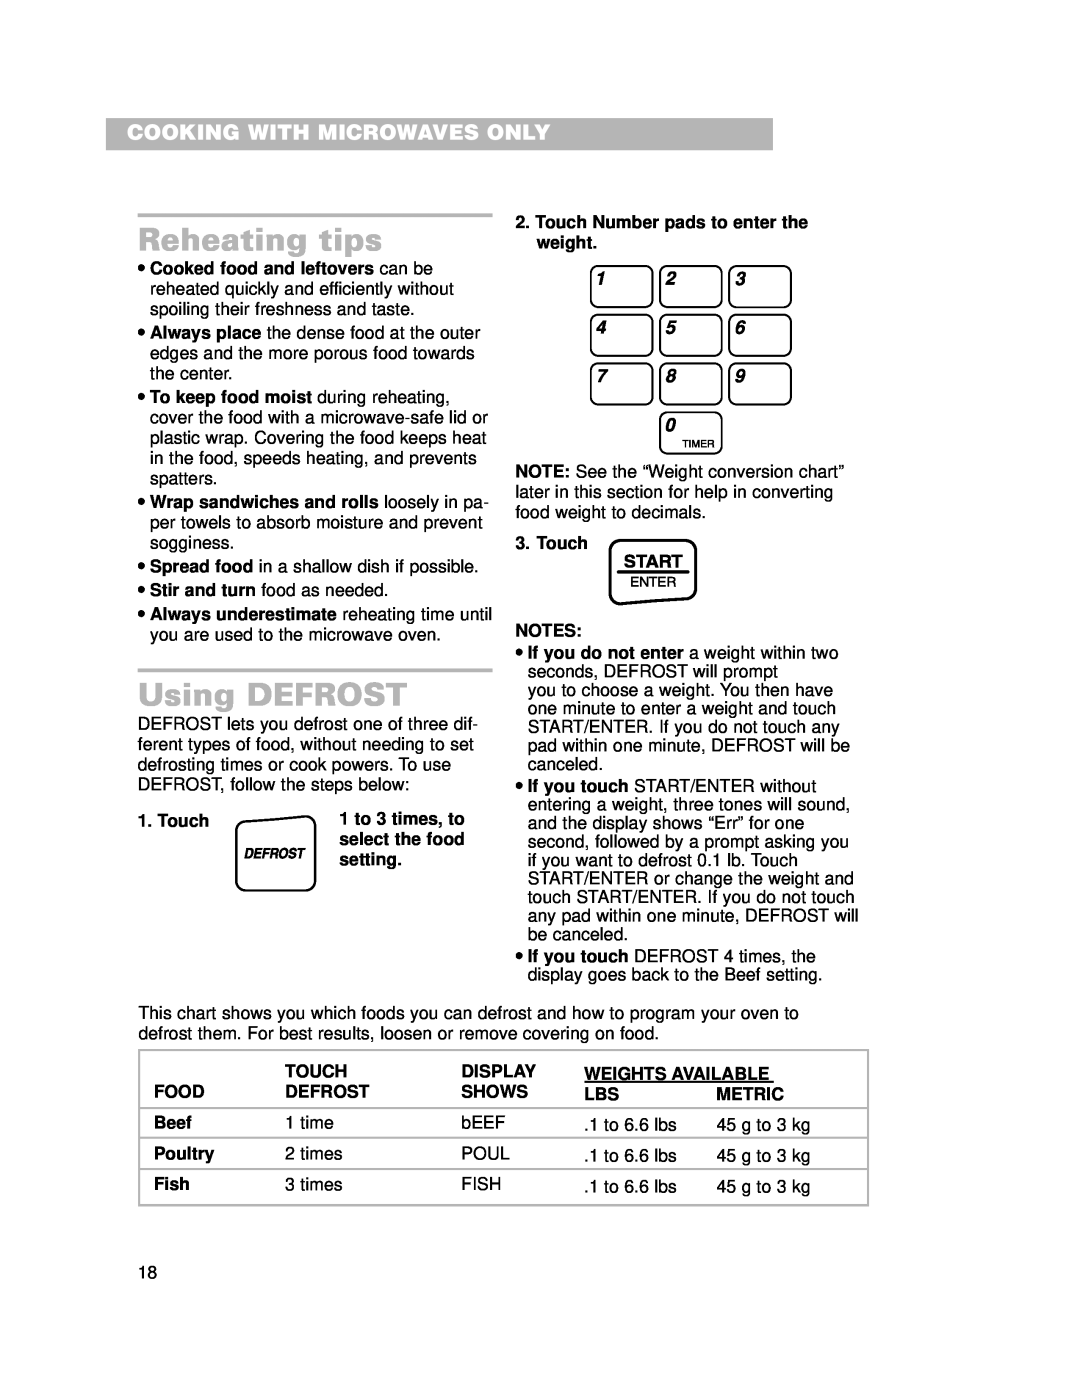 Whirlpool CMT102SG installation instructions Reheating tips, Using DEFROST, Cooking With Microwaves Only 